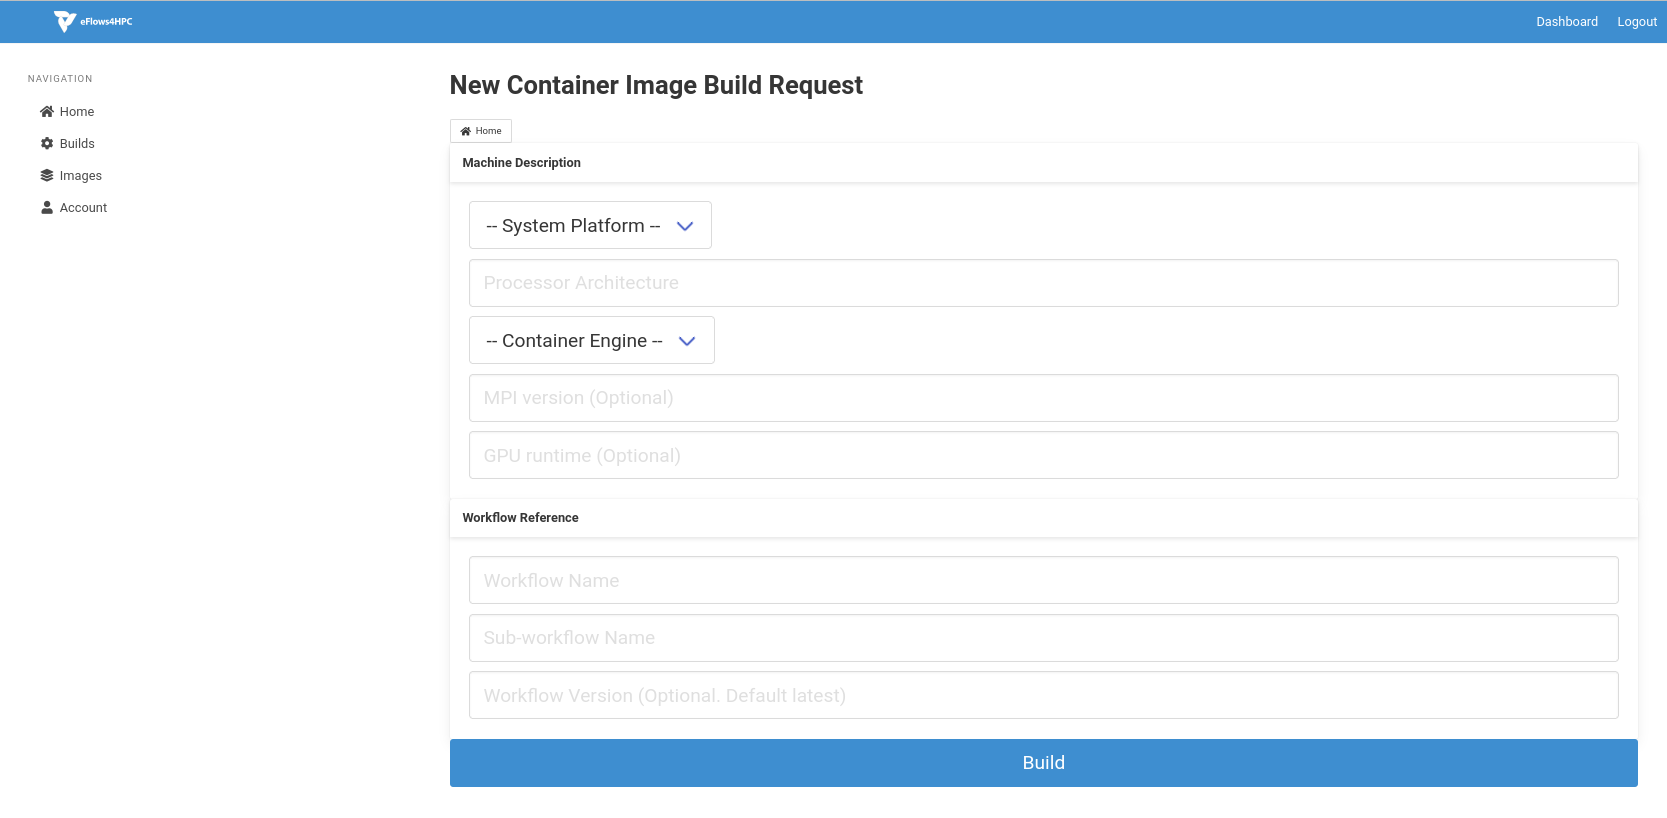 Container Image Creation Service image build request page